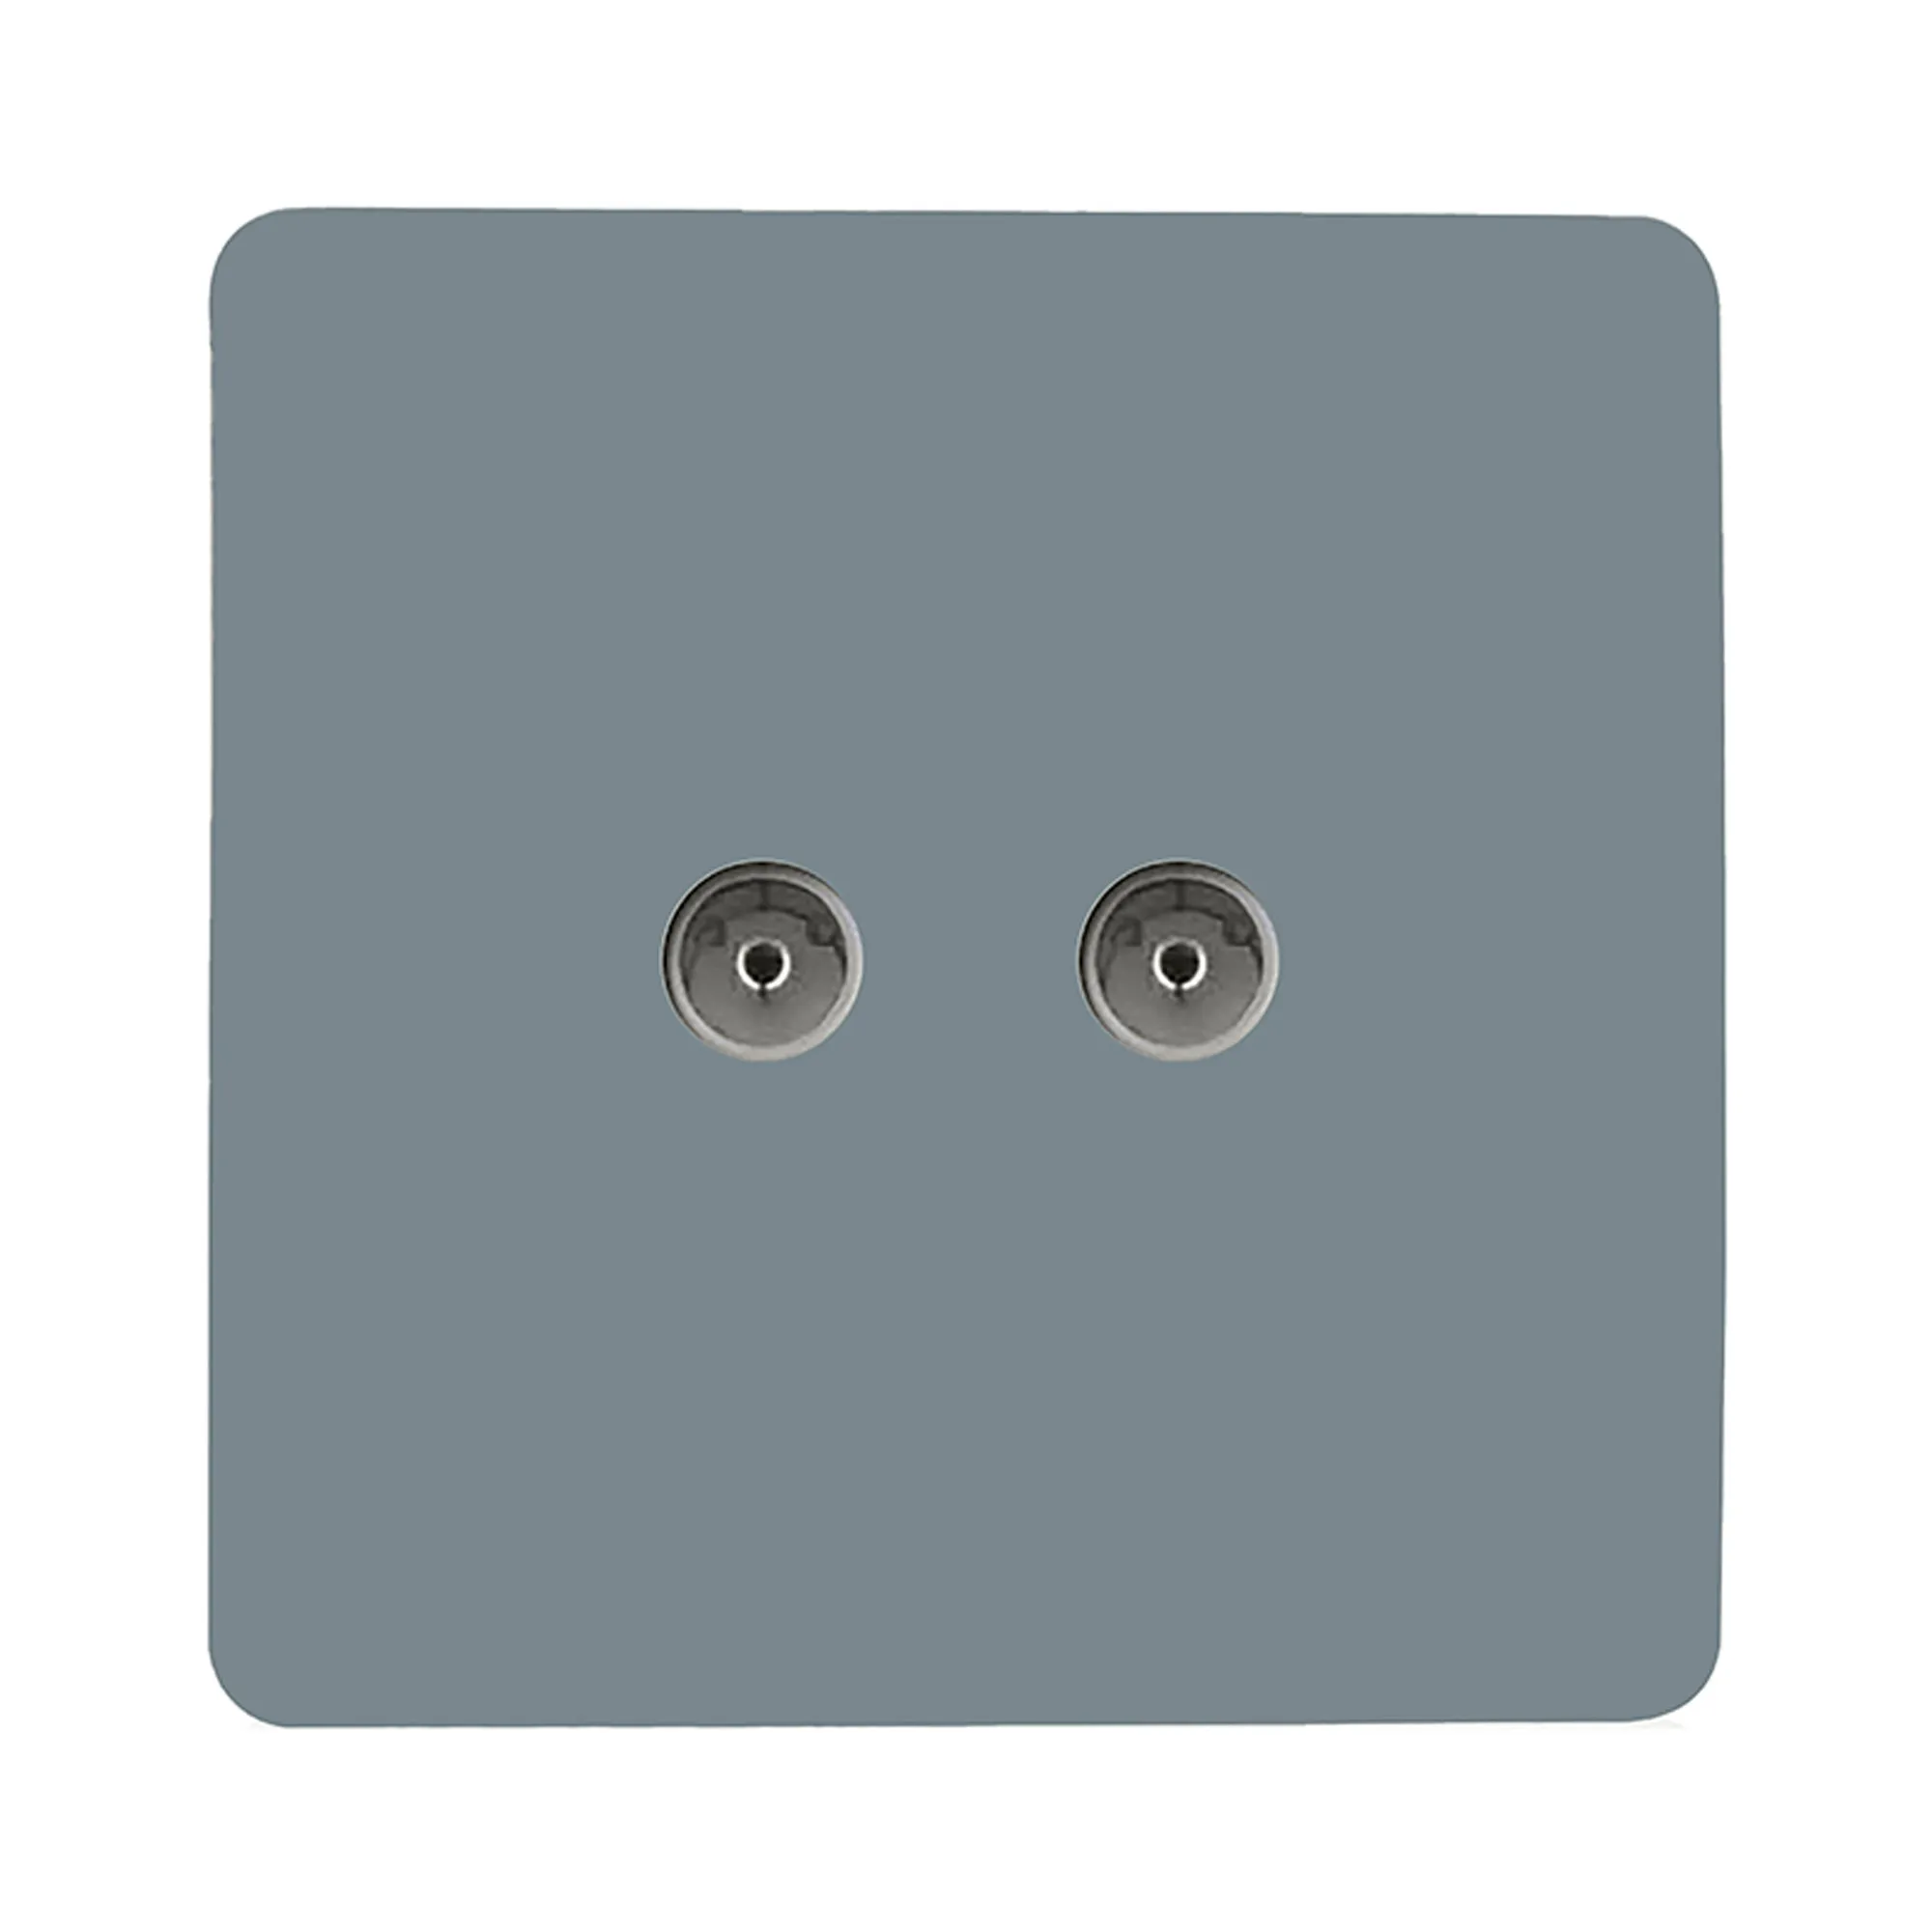 Twin TV Co-Axial Outlet Cool Grey